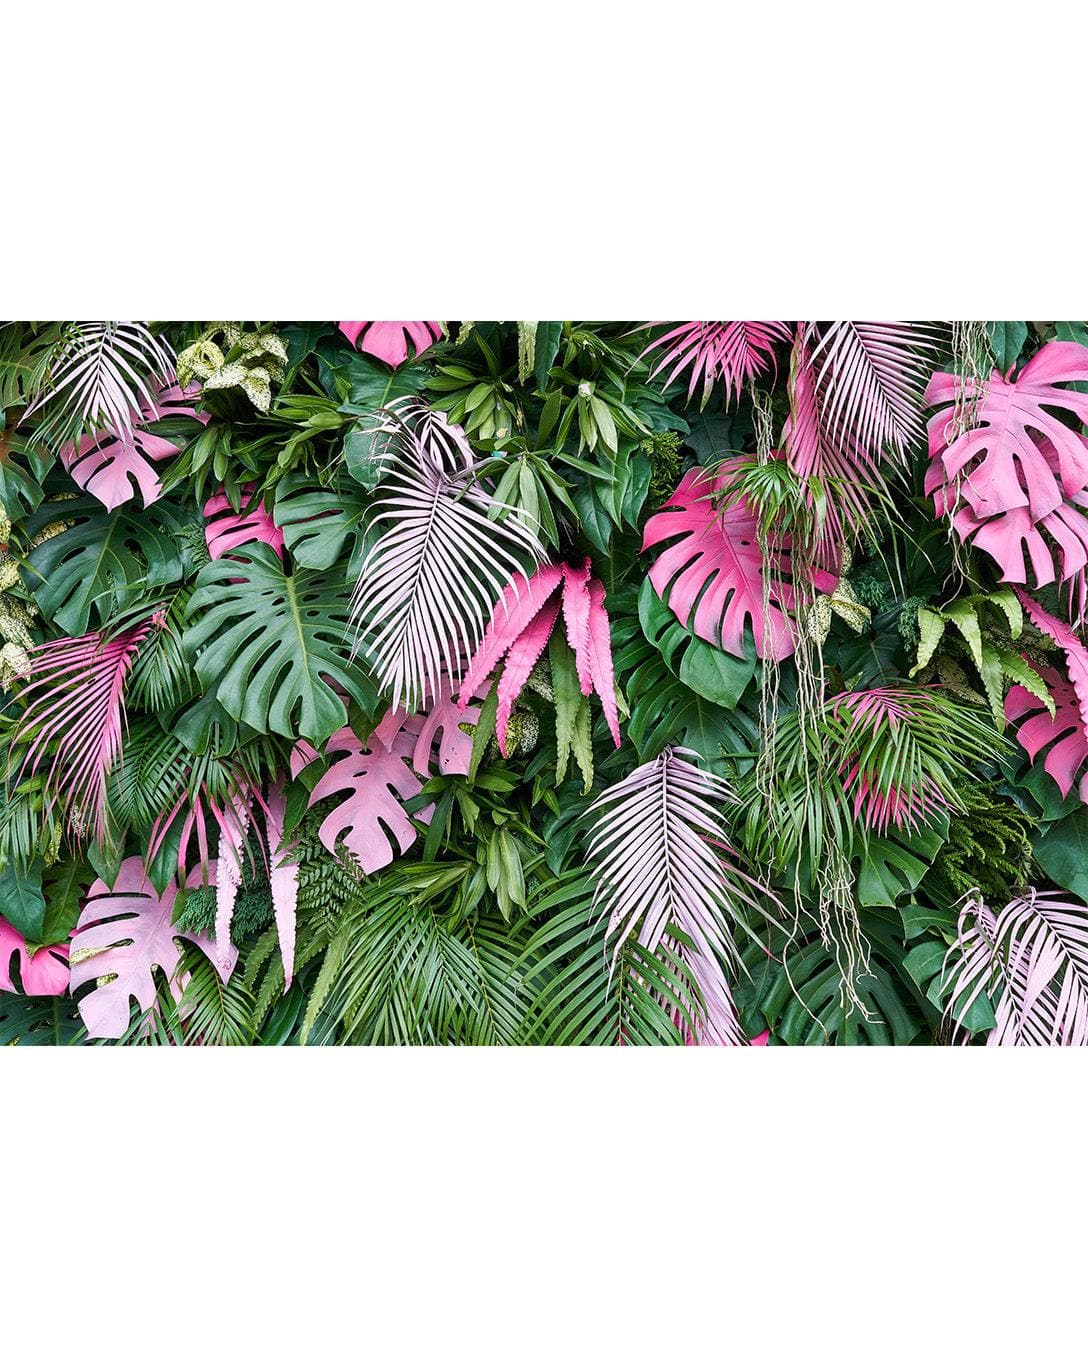 Colorful Tropical Palm Leaves Wall Mural Colorful Tropical Palm Leaves Wall Mural 